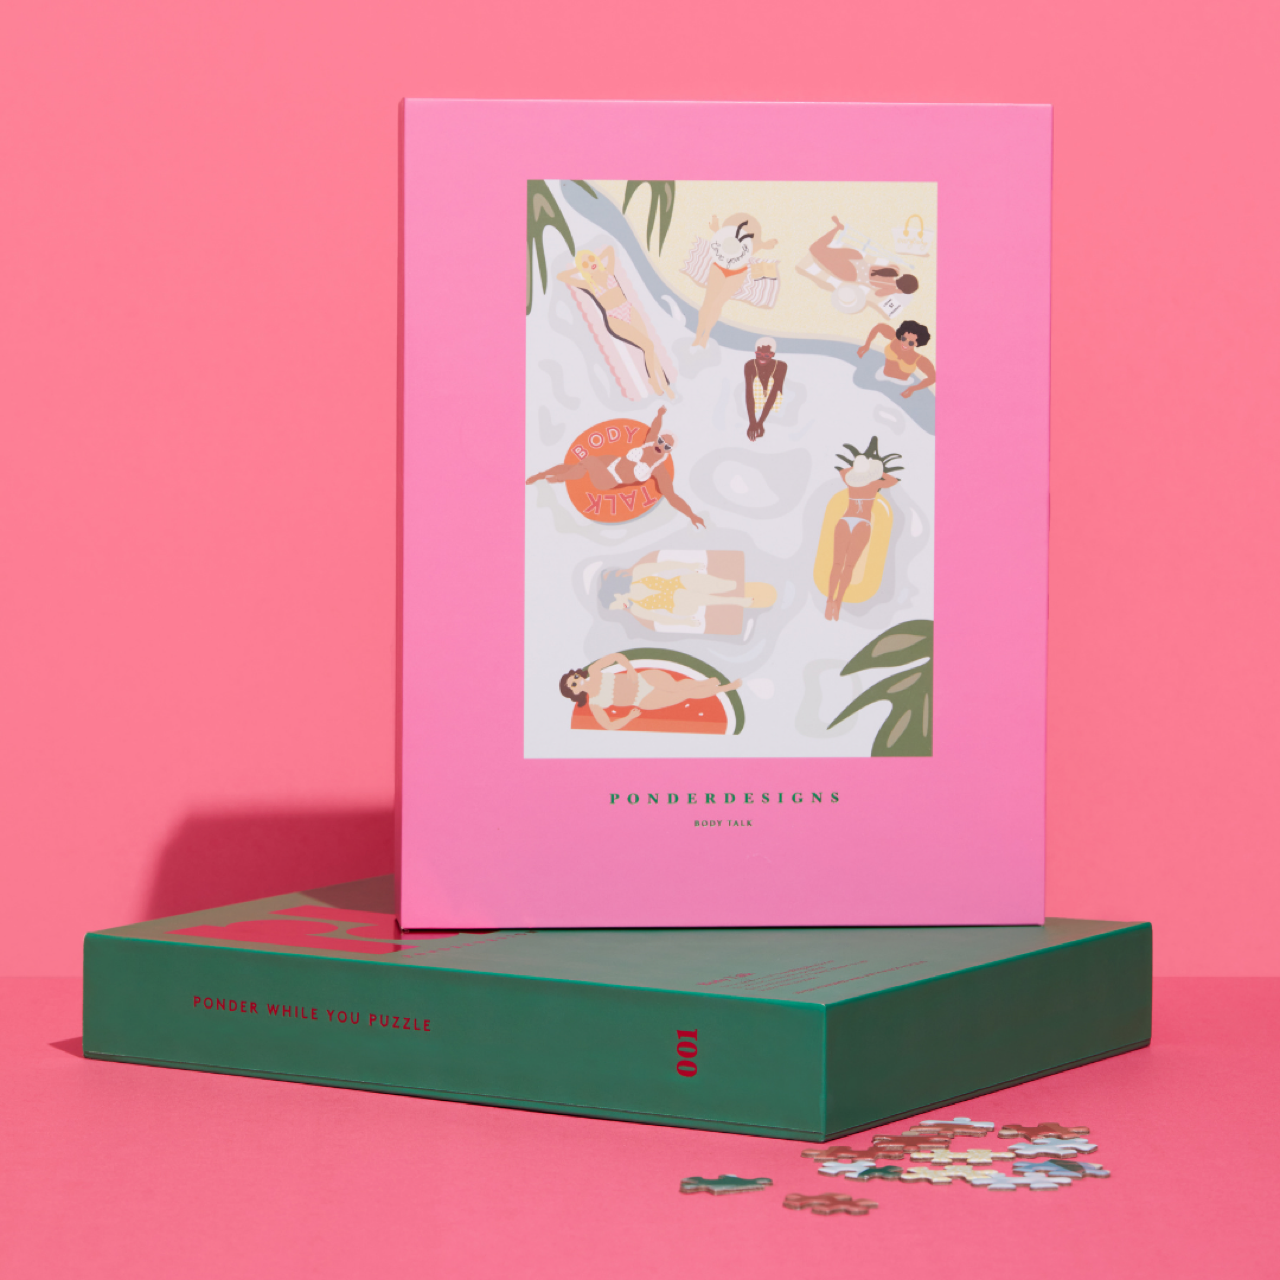 Unique jigsaw puzzle design of 1000 pieces. Illustration, art puzzle titled "body talk" designed to reconnect with the mind. Modern packaging of pink and green boxes with different shaped pieces.